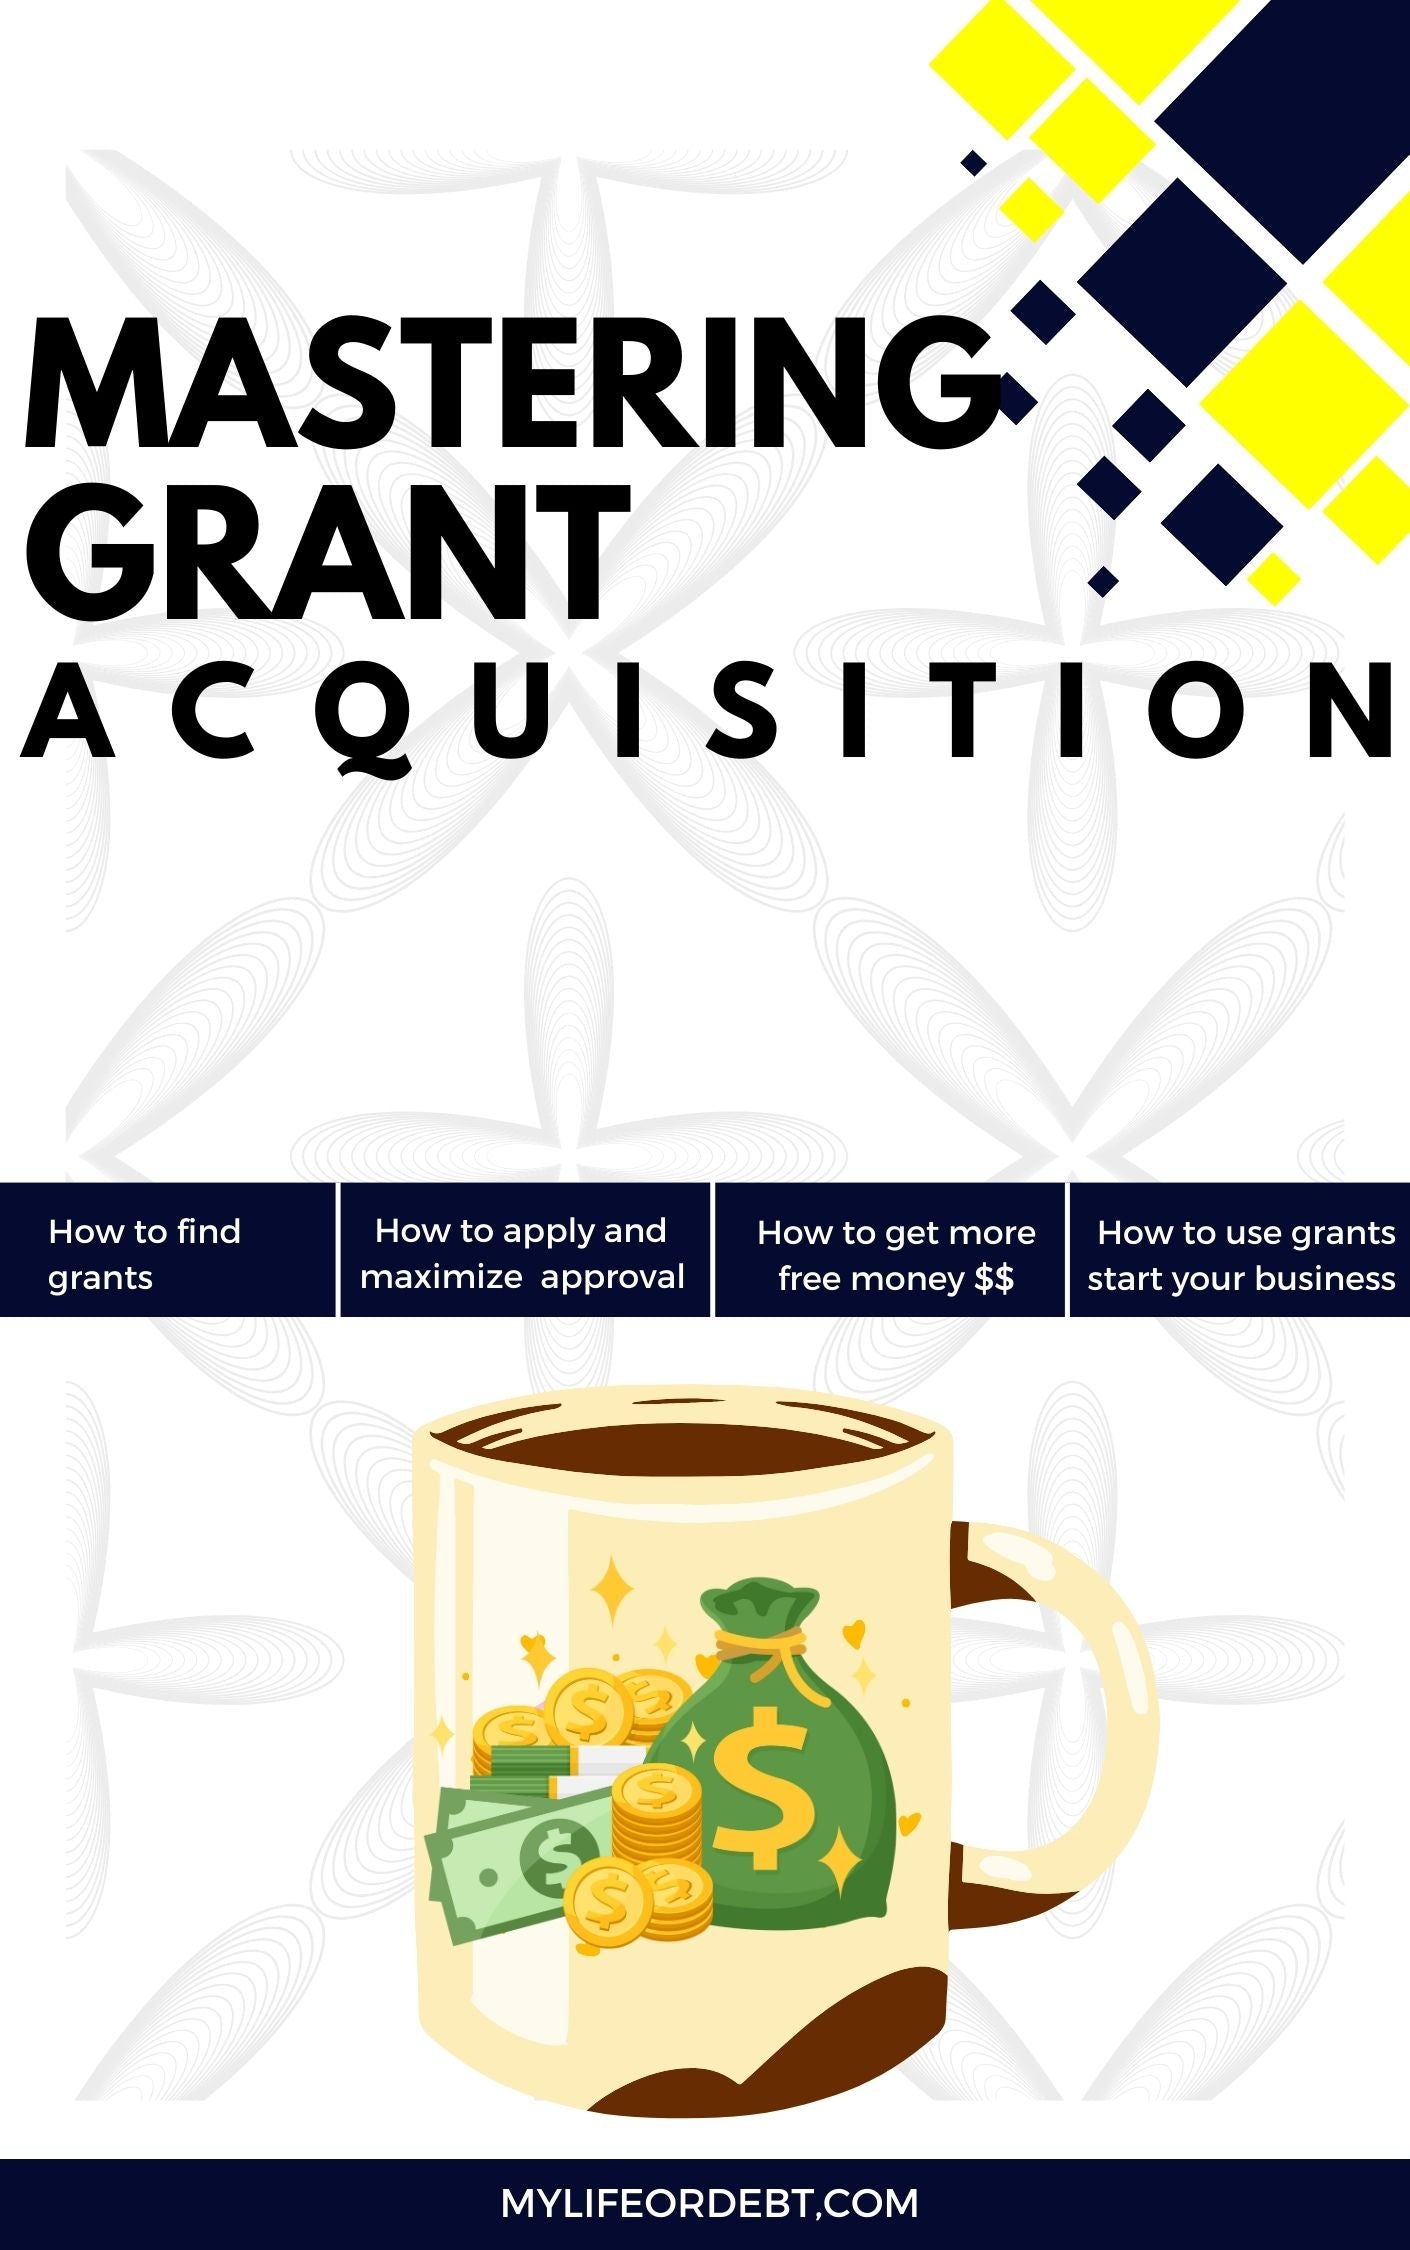 Mastering Grant Acquisition: How to Find and win free money for your business.